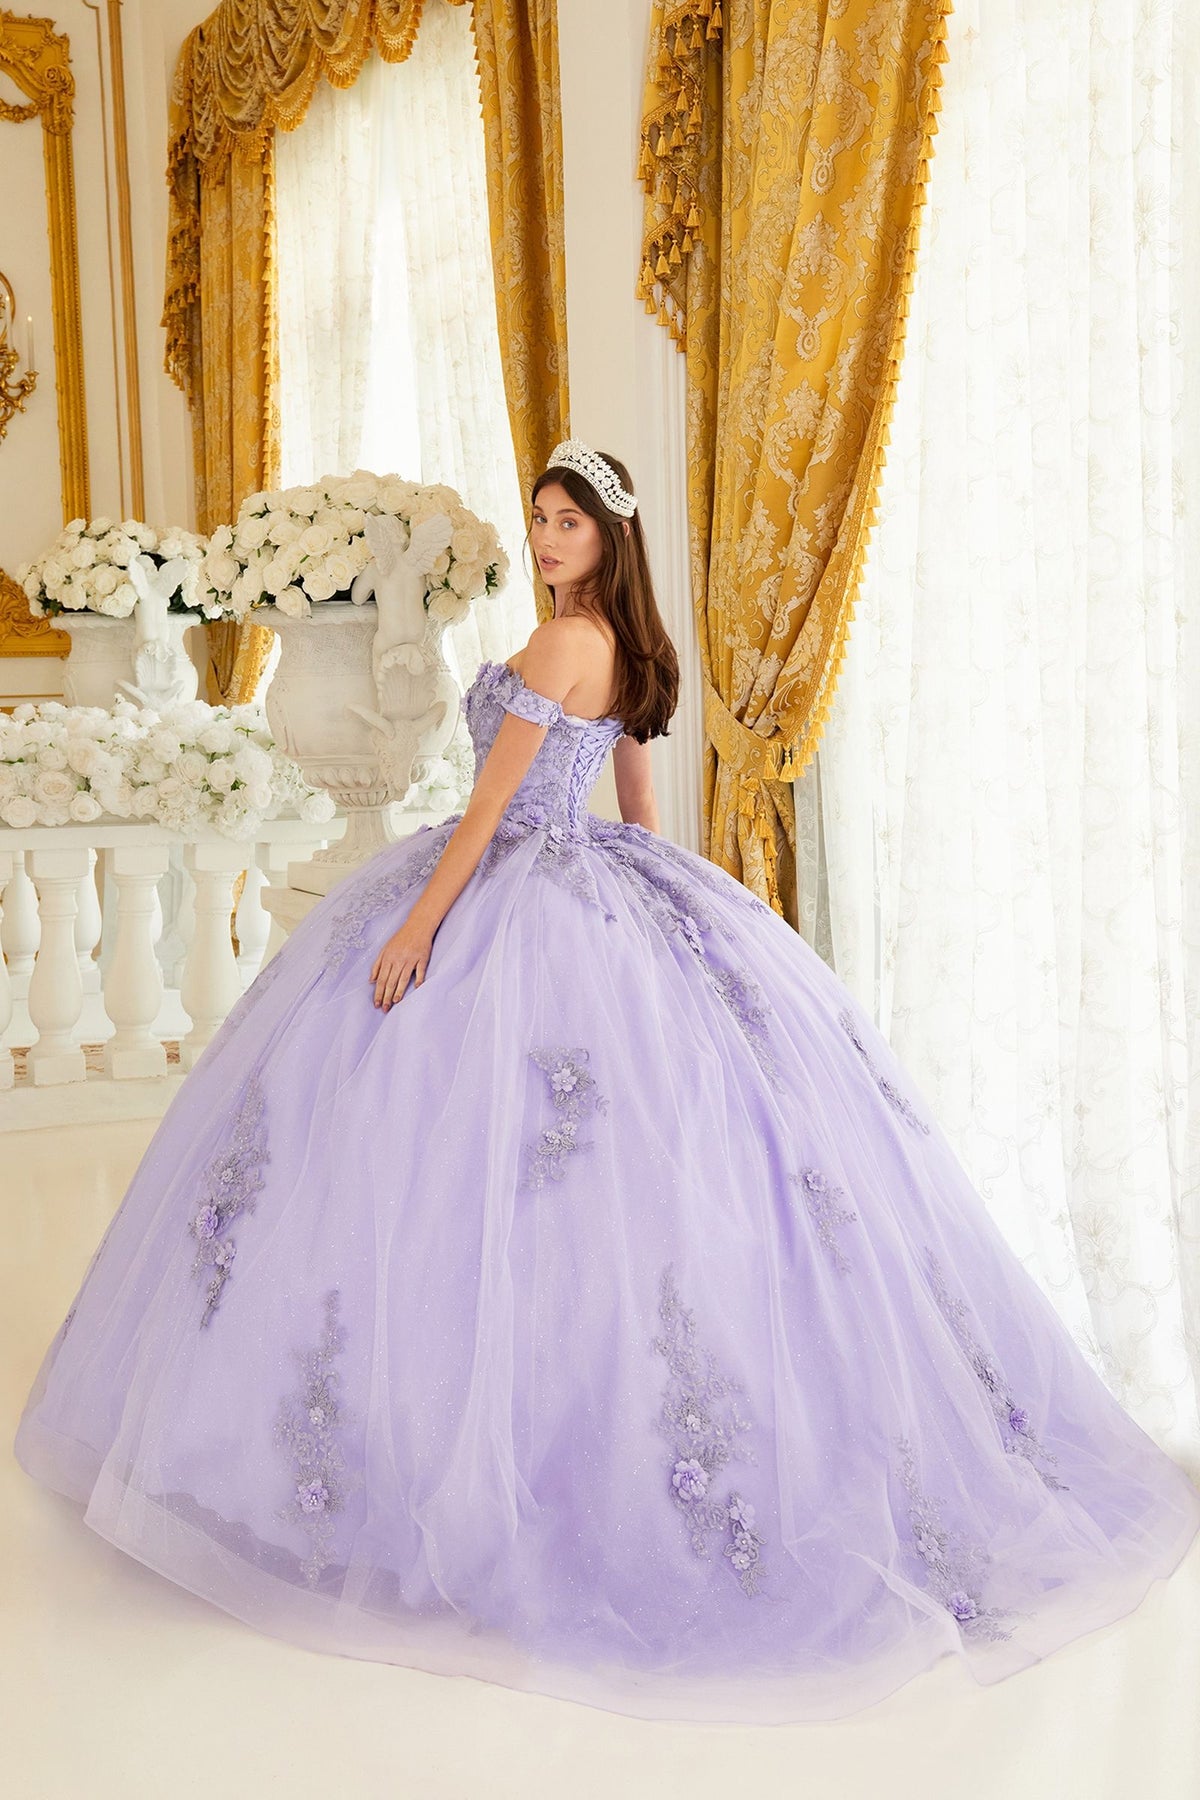 LaDivine by Cinderella Divine - Style 15702 - Off-the-Shoulder Floral Ball Gown, A-Line Silhouette, Sweetheart Bodice, Cap Sleeves, Beaded 3D Floral Appliques.  Available at Madeline's Boutique In Boca Raton, Florida.